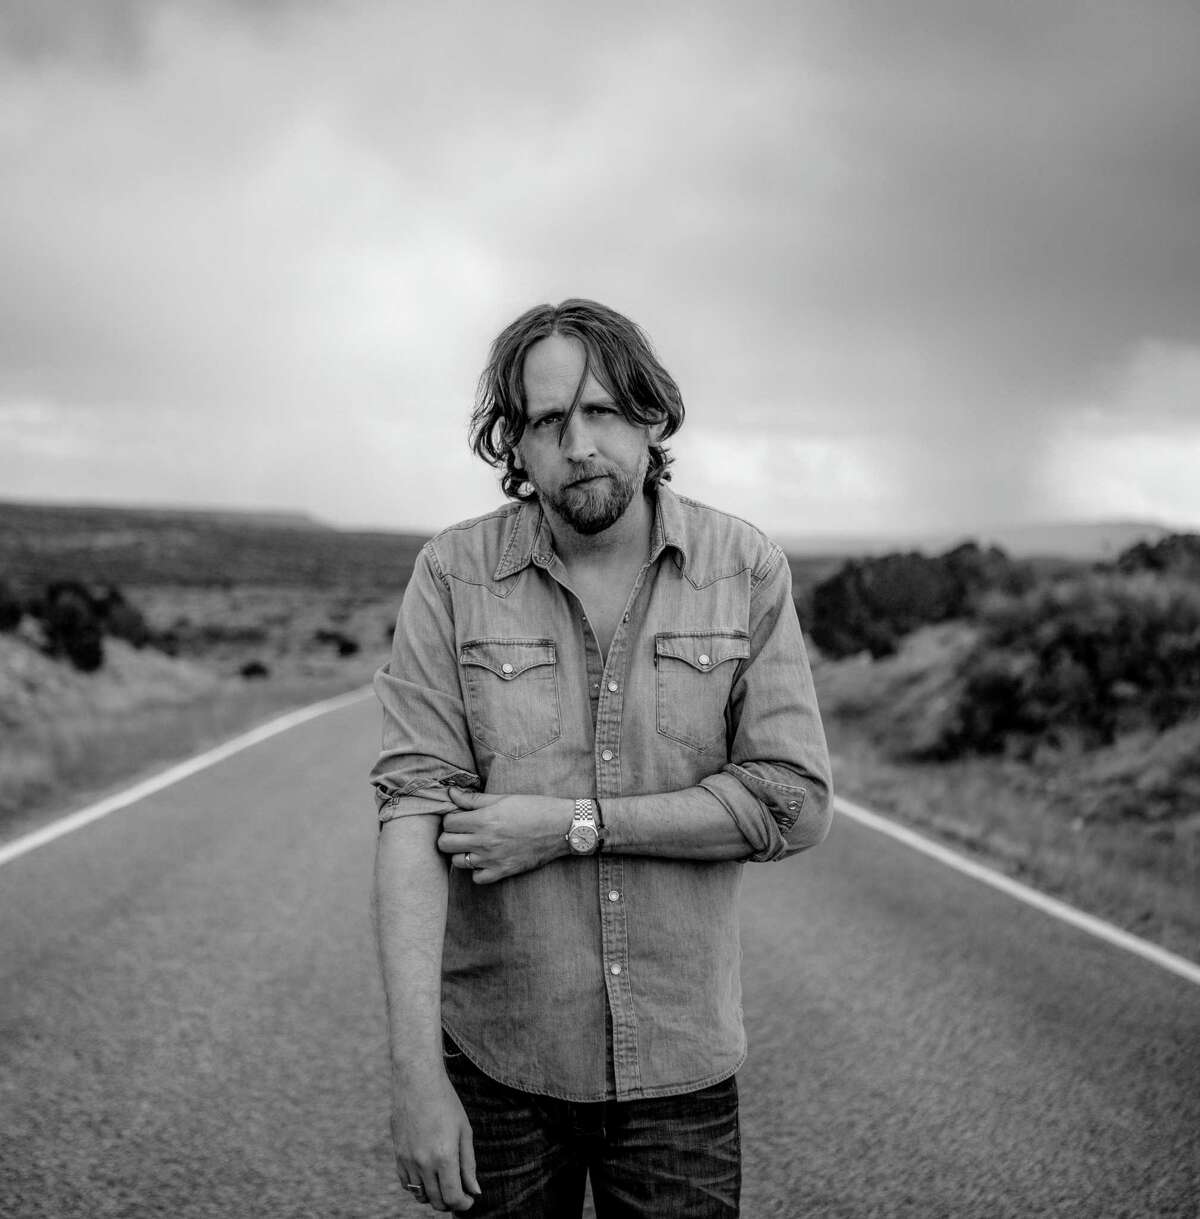 Singer and songwriter Hayes Carll grew up in The Woodlands.